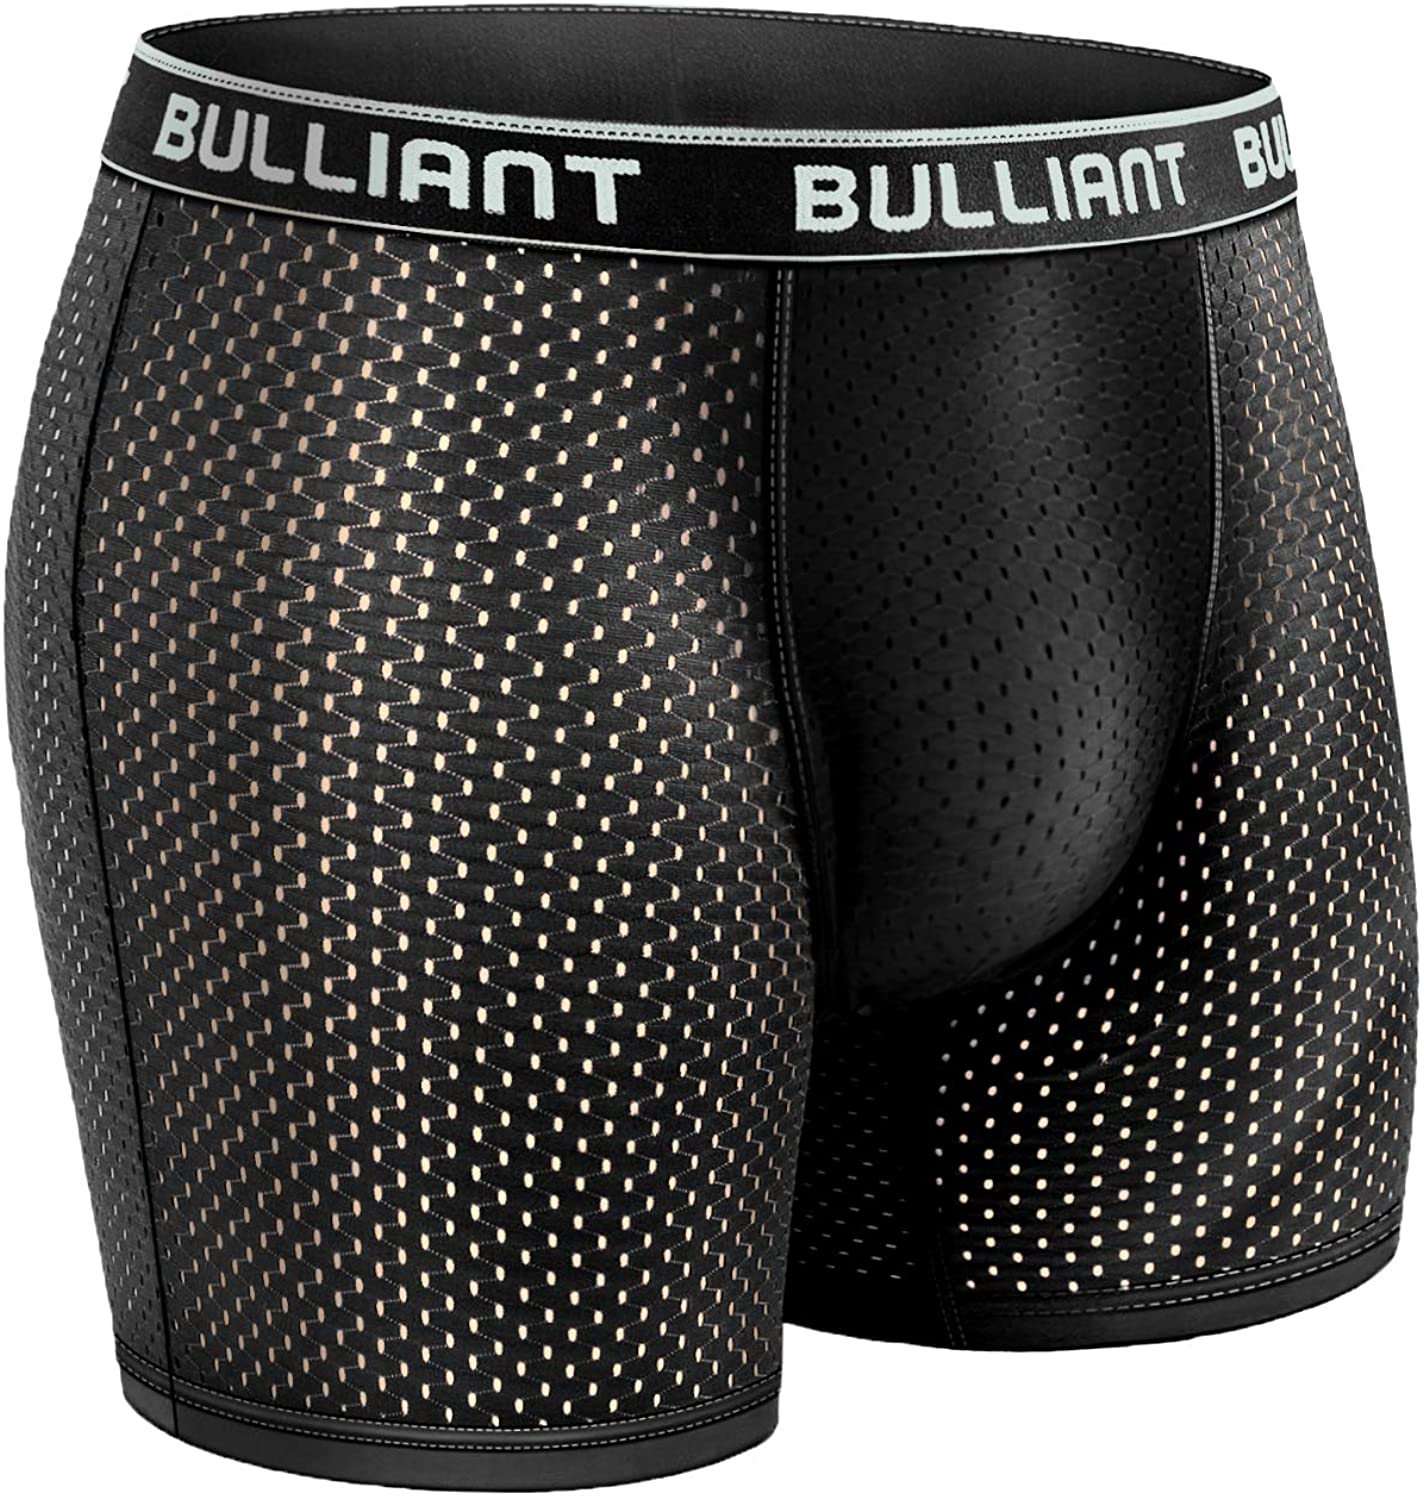 Mens Boxer Briefs 3Pack,Bulliant Mesh Breathable Pouch Underwear Cool Comfort No Fly for Men